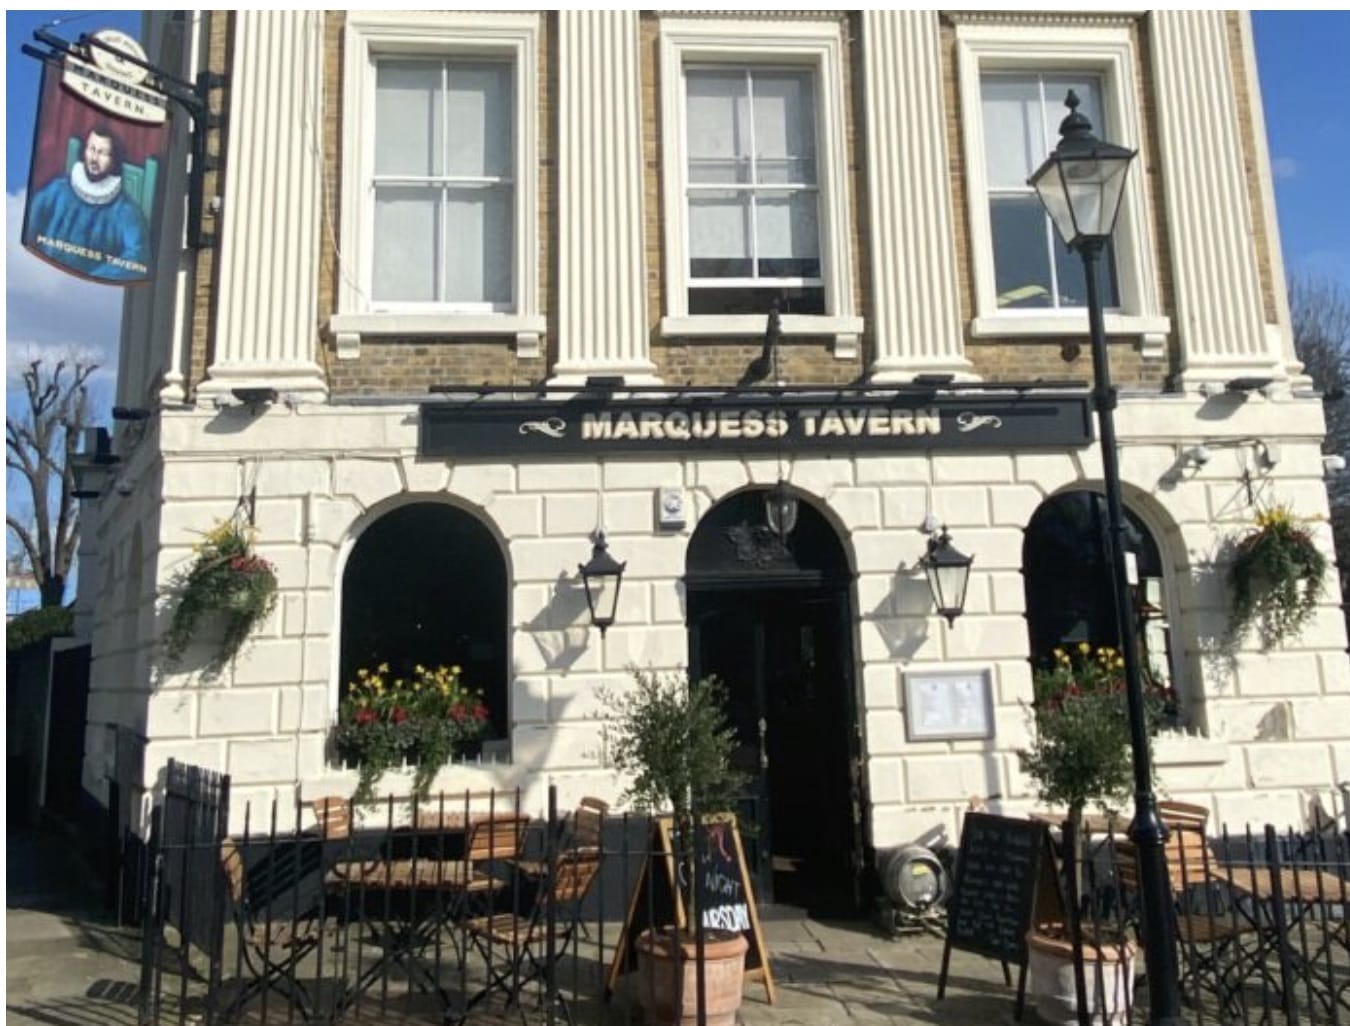 Management Partnership Pubs In London - Run The Marquess Tavern !